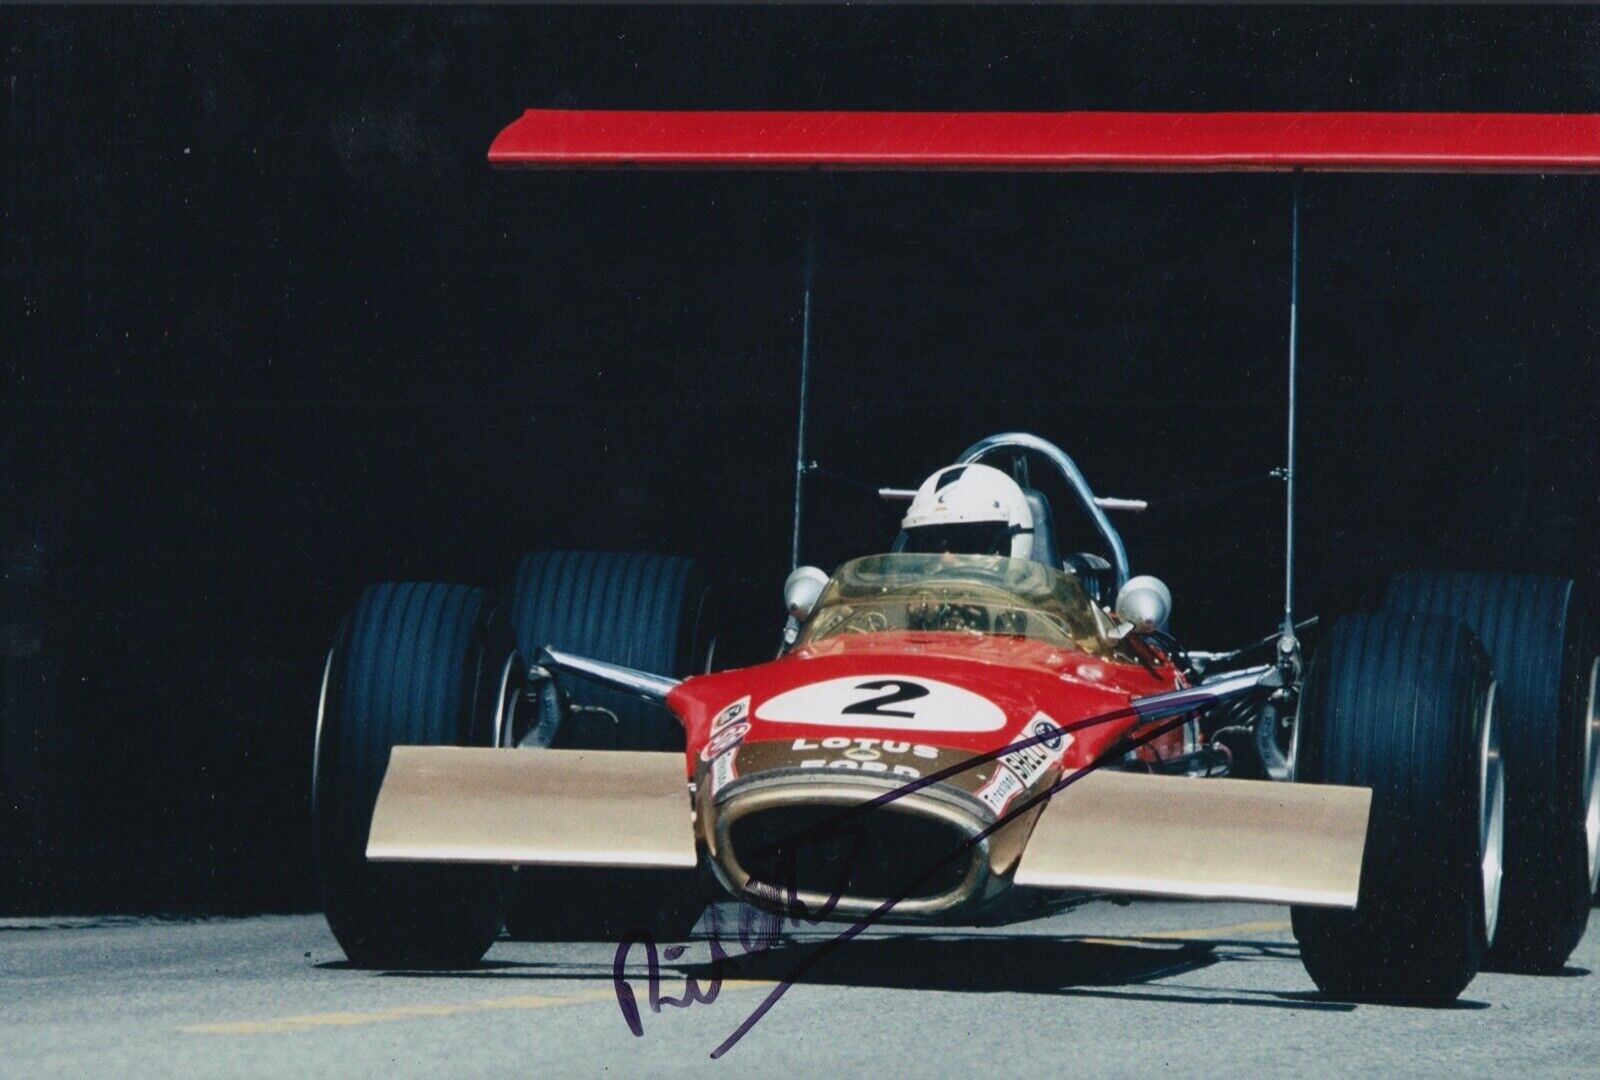 Richard Attwood Hand Signed 12x8 Photo Poster painting F1 Autograph Lotus 6